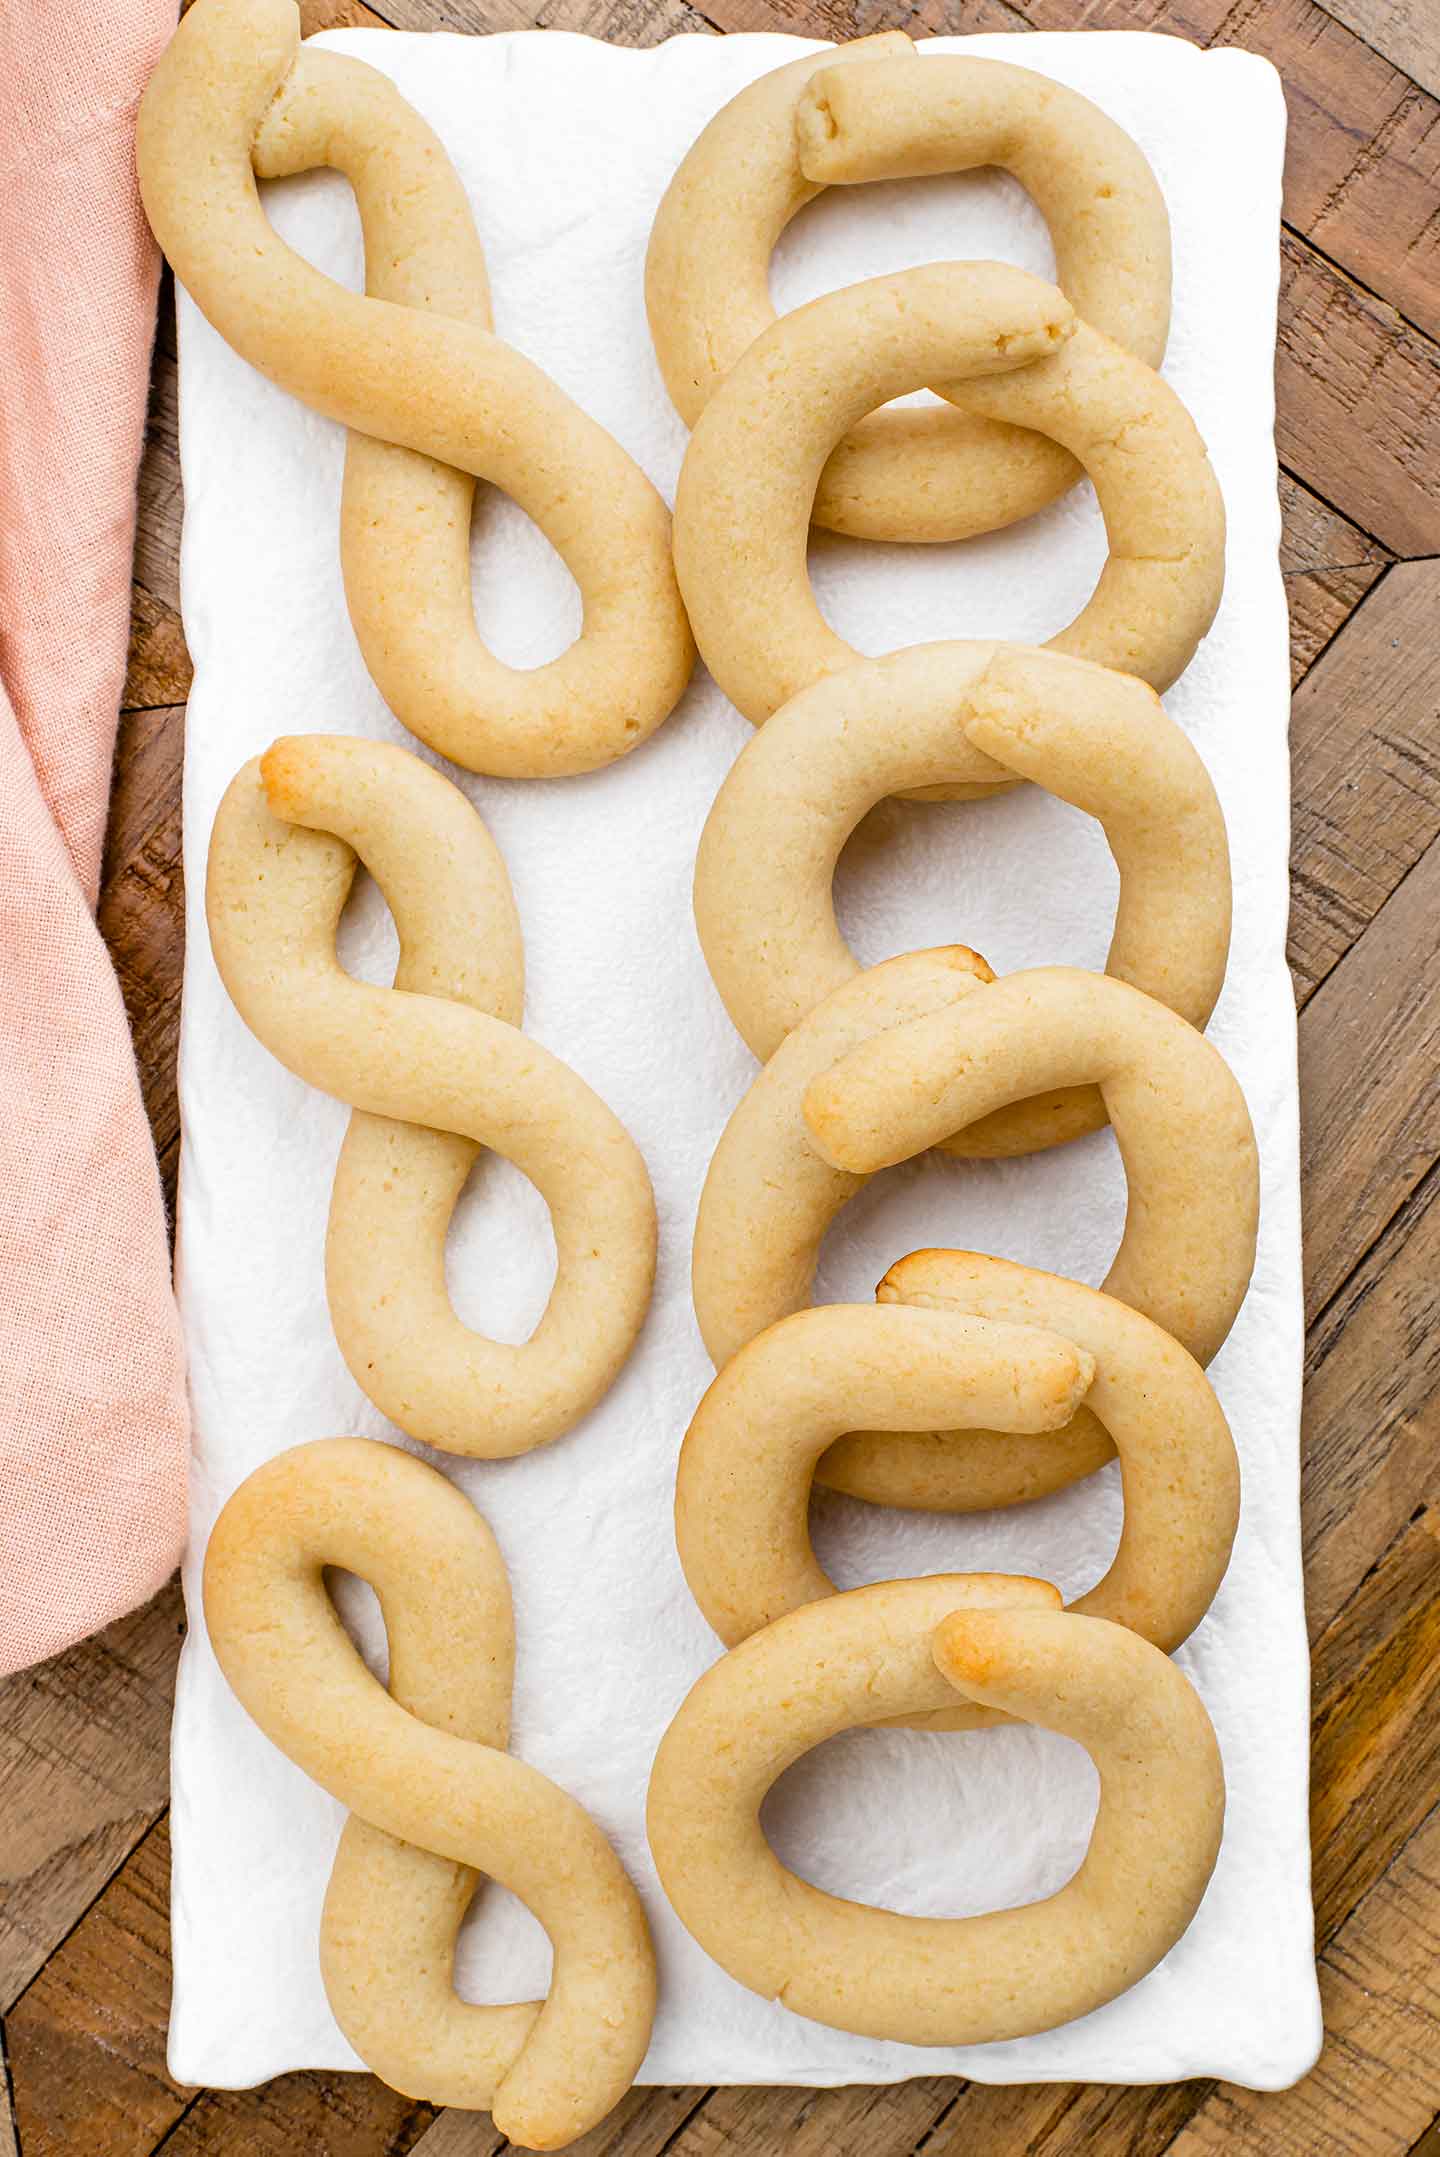 Top down view of Portuguese biscoitos displayed on a white platter. On one side are circular cookies and on the other are cookies formed into a figure eight shape.